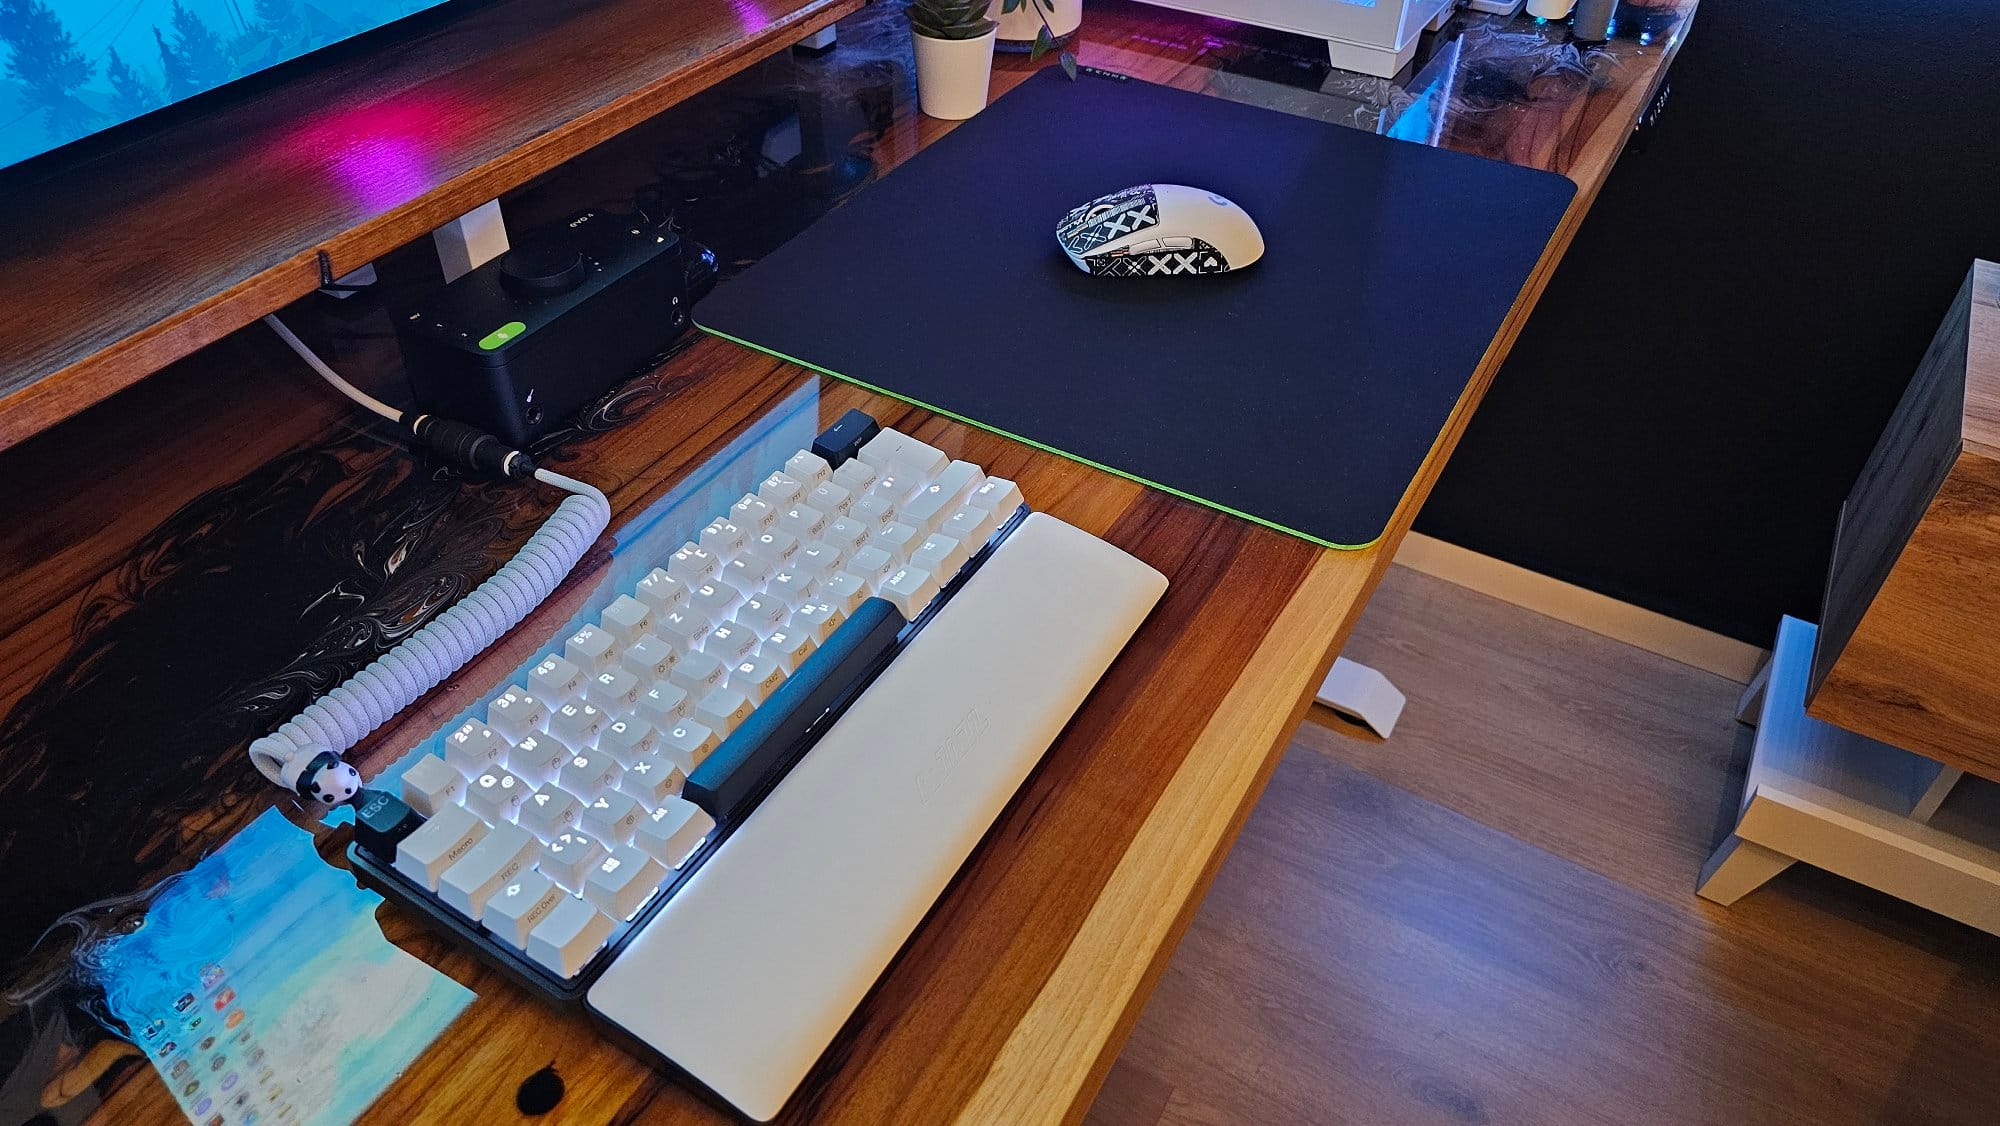 A close-up view of a modern workspace featuring a white mechanical keyboard on a large mouse pad, a custom-designed gaming mouse, and various tech gadgets on a polished wooden desk with ambient lighting in the background